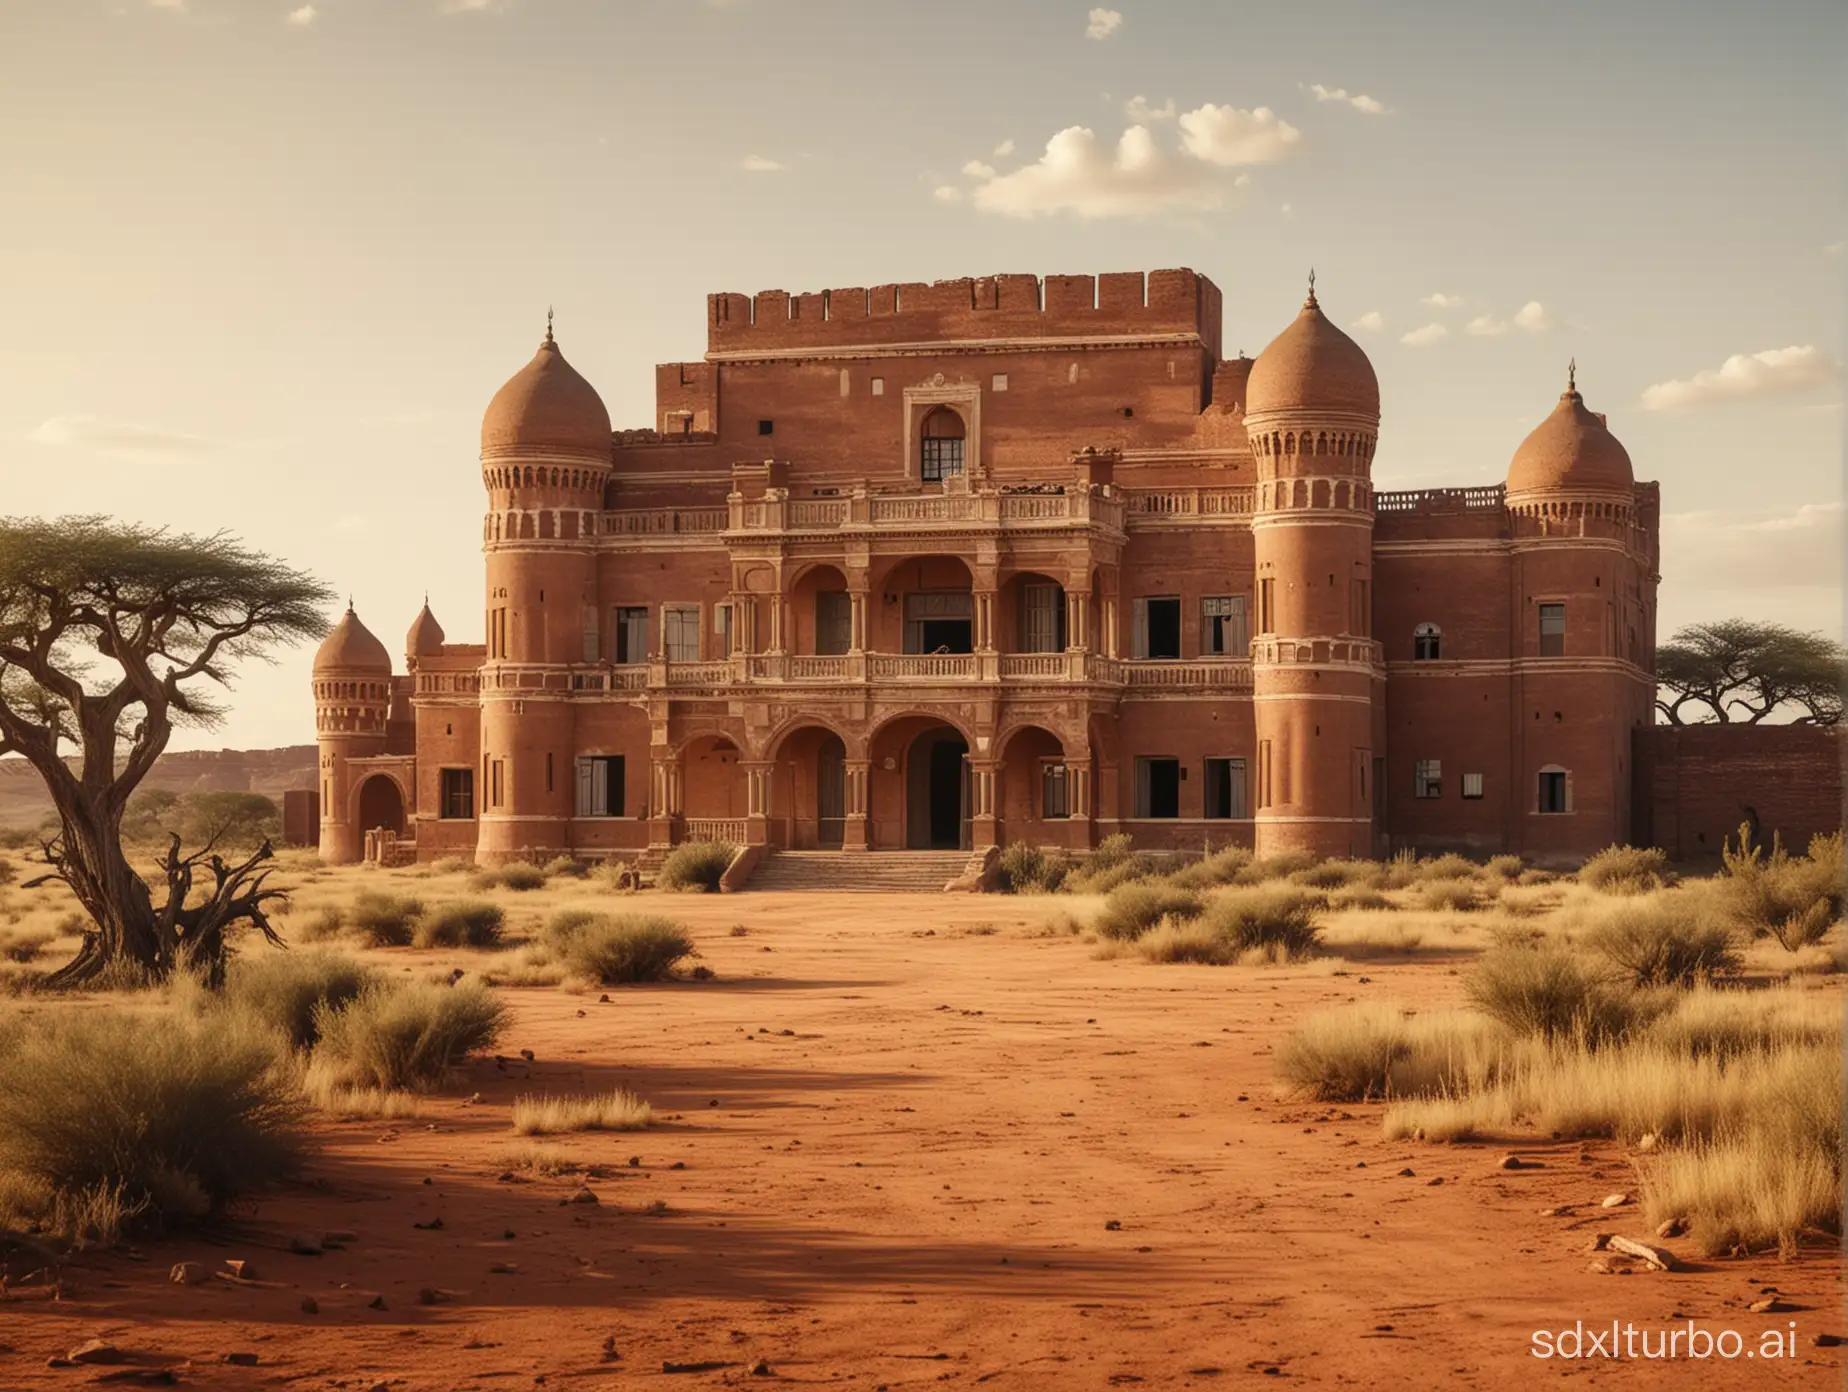 cinematic image of the Palace of Carondelet in the African plains